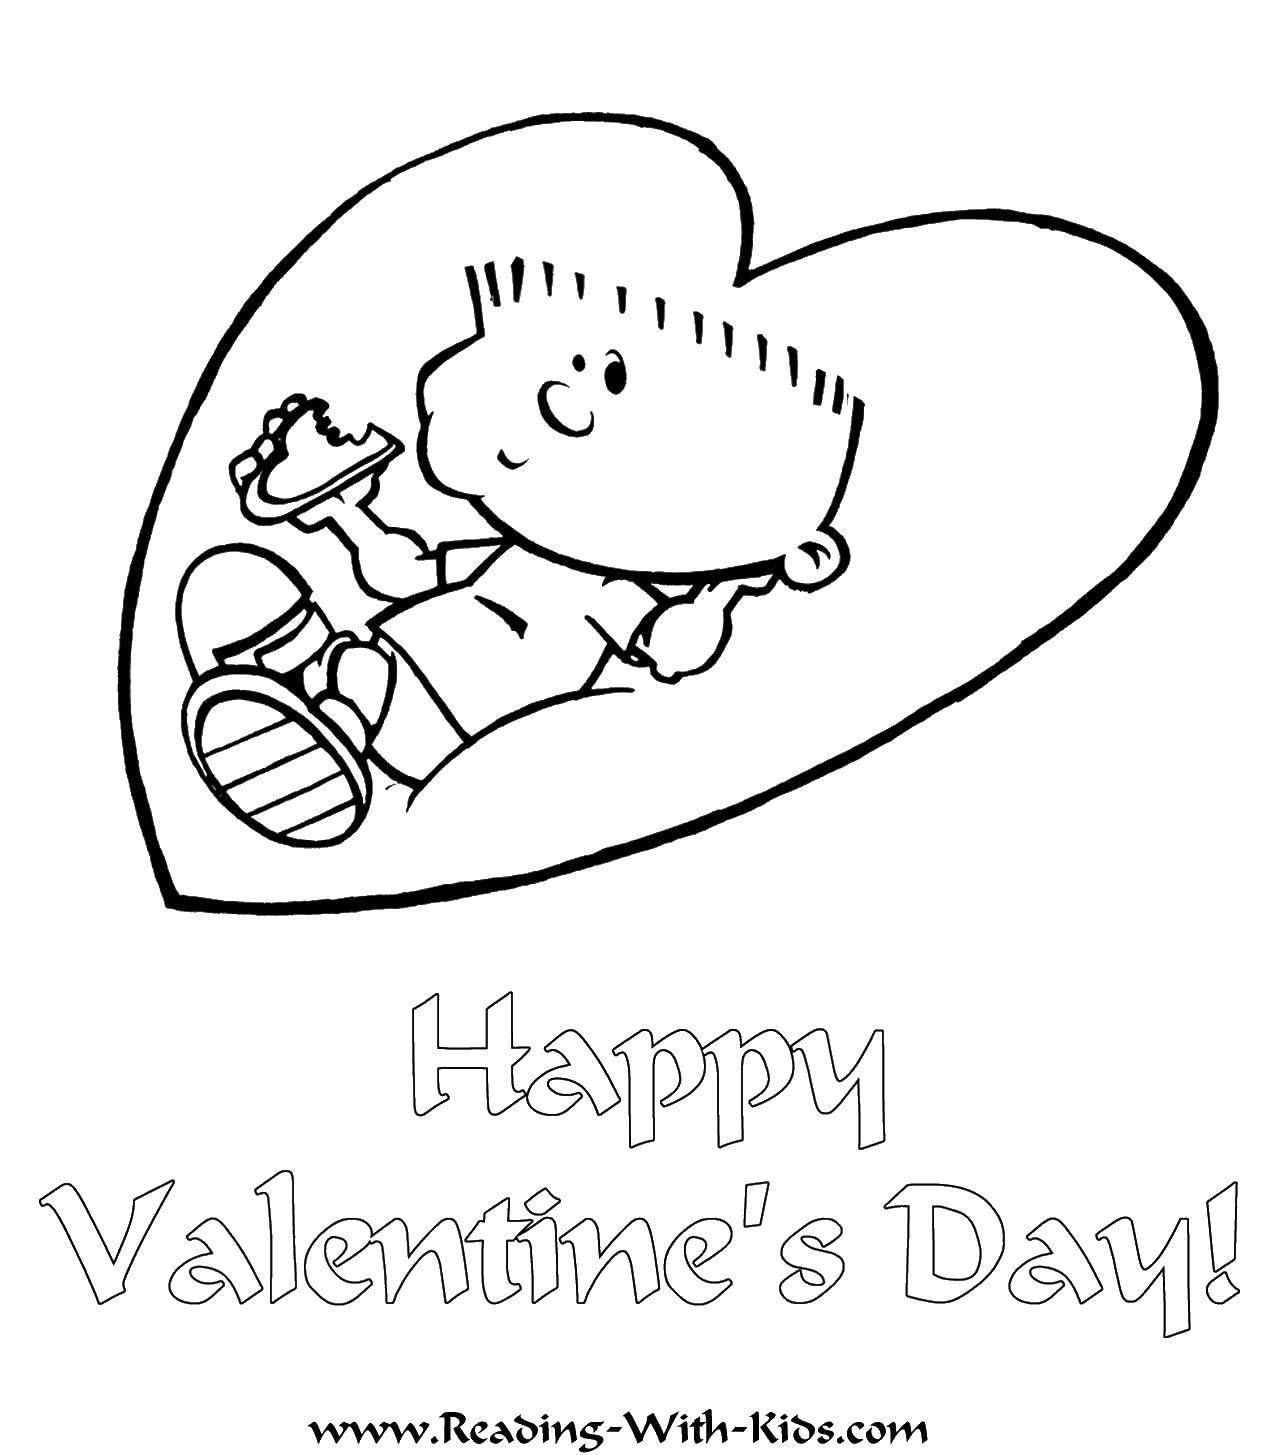 Coloring Boy and heart. Category Valentines day. Tags:  boy, heart.